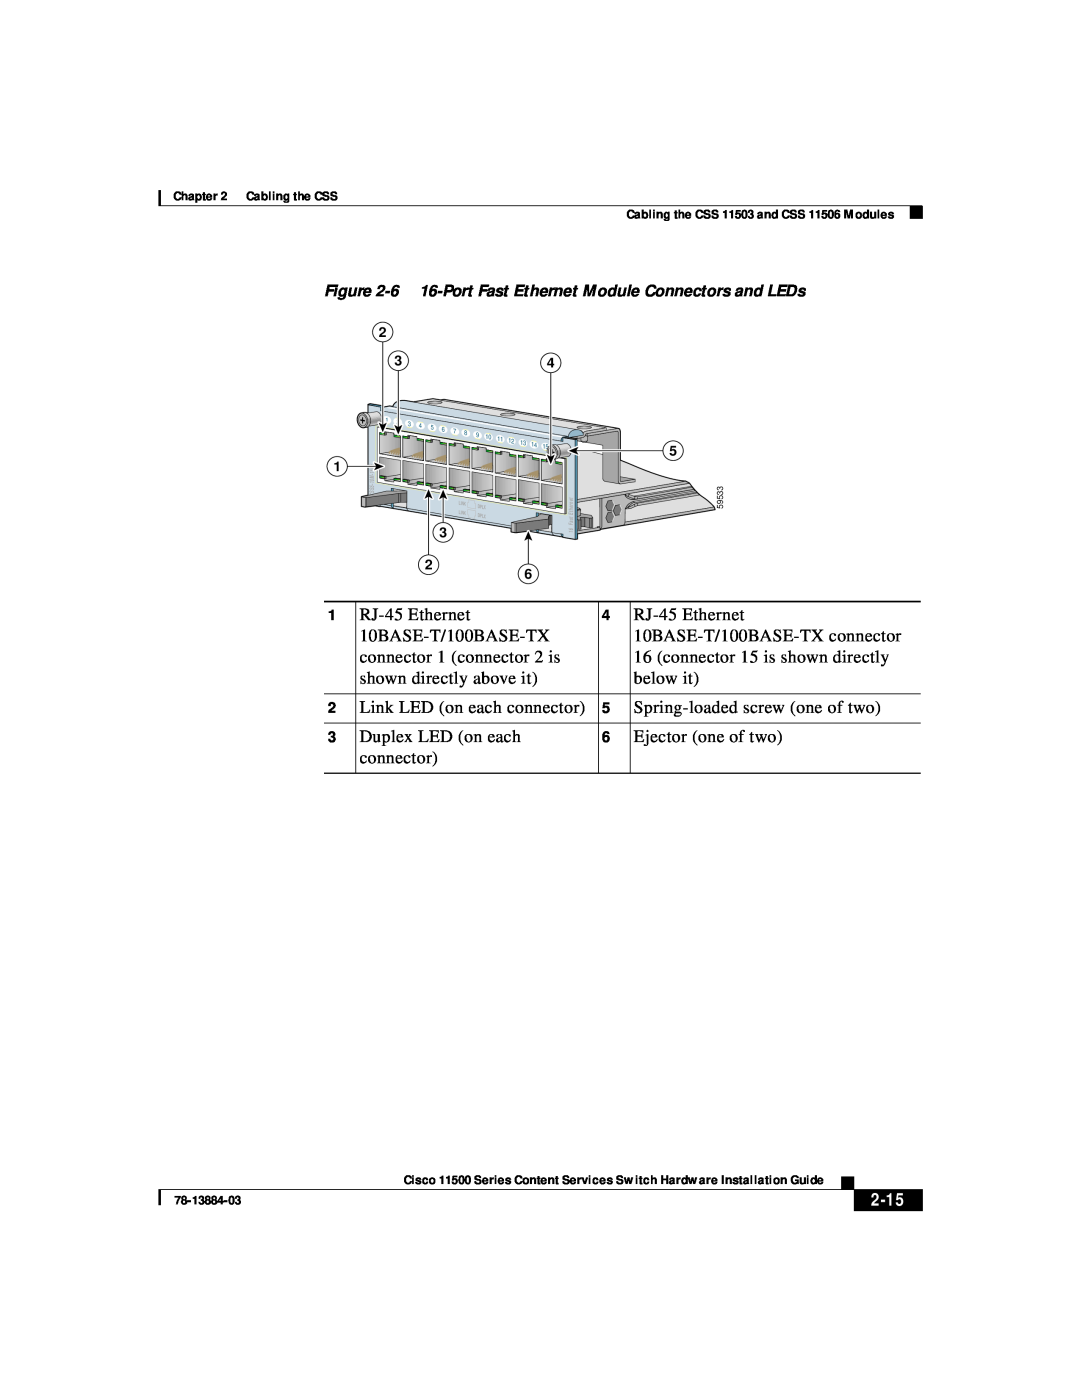 Cisco Systems 11500 Series manual 2-15, 6 16-Port Fast Ethernet Module Connectors and LEDs, 10M-16FE 